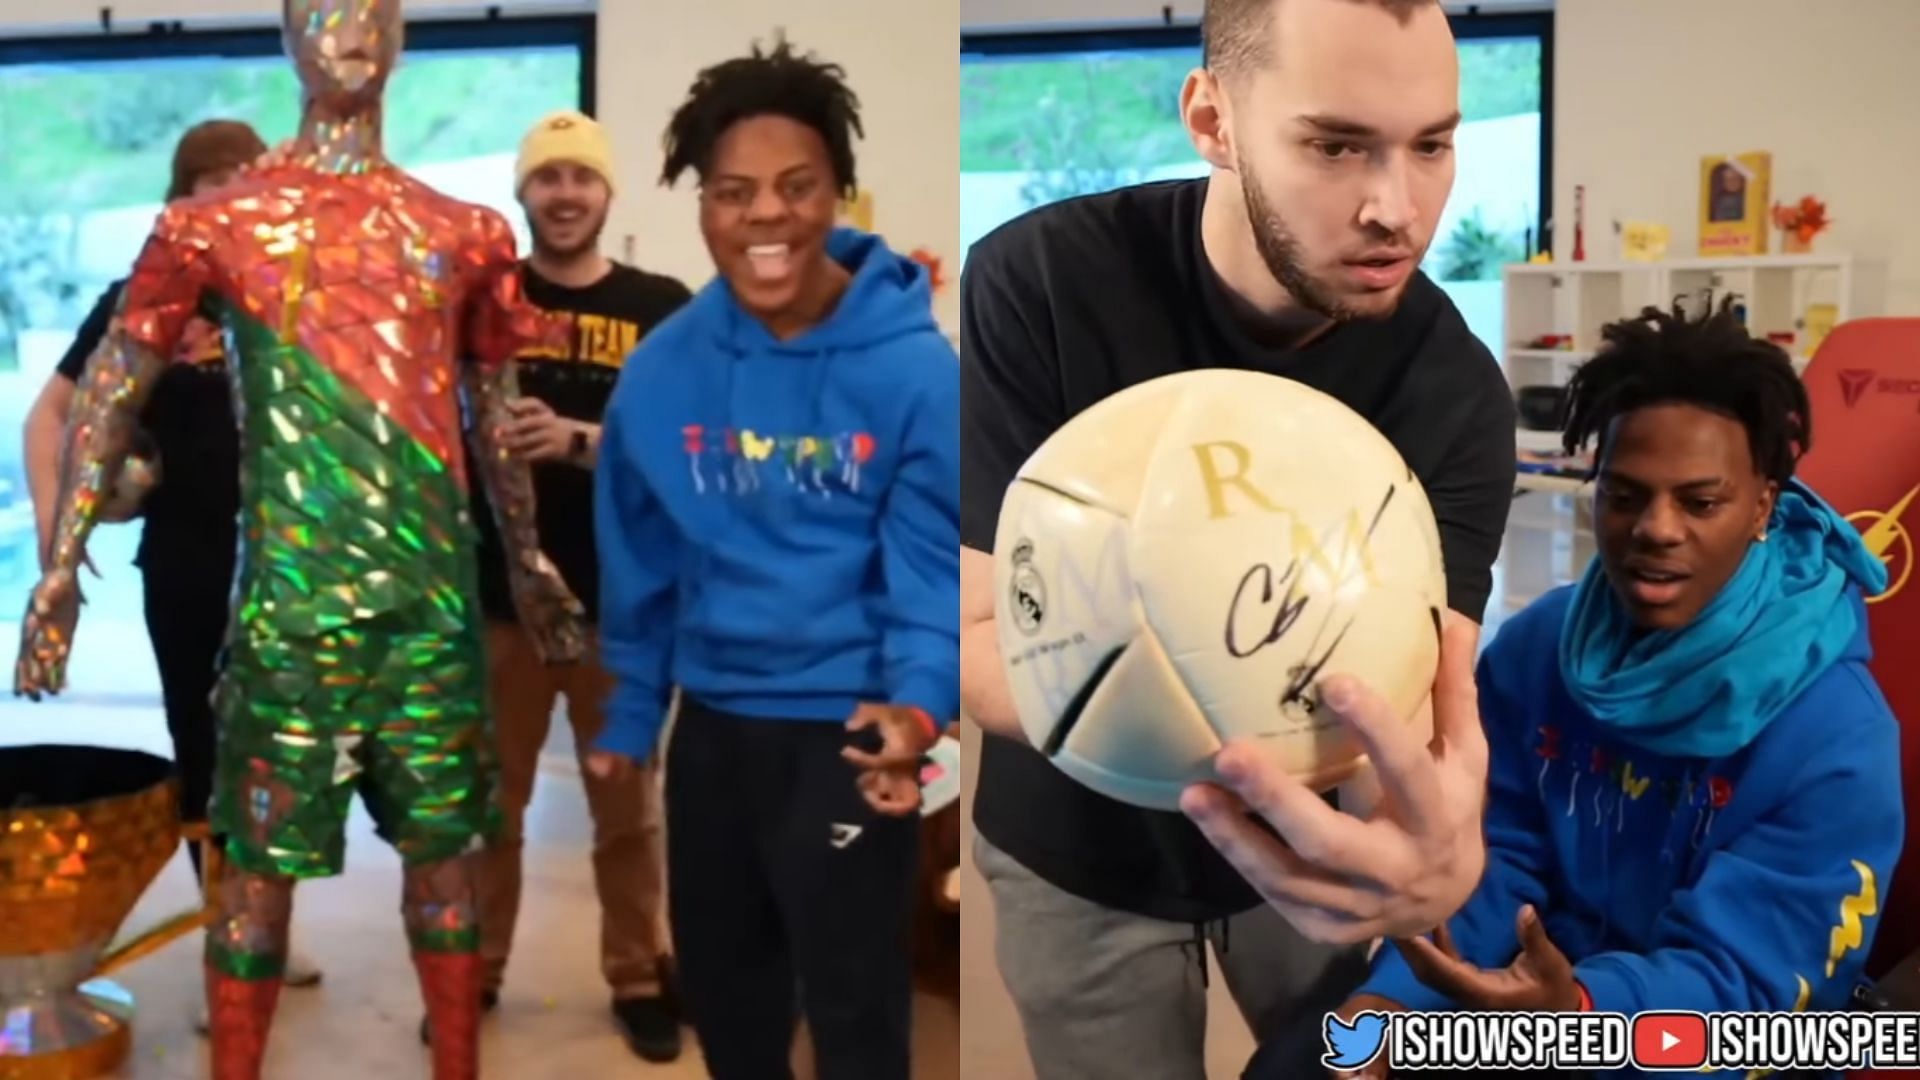 Adin Ross surprises IShowSpeed with a life-sized Ronaldo figure on the  latter's 18th birthday